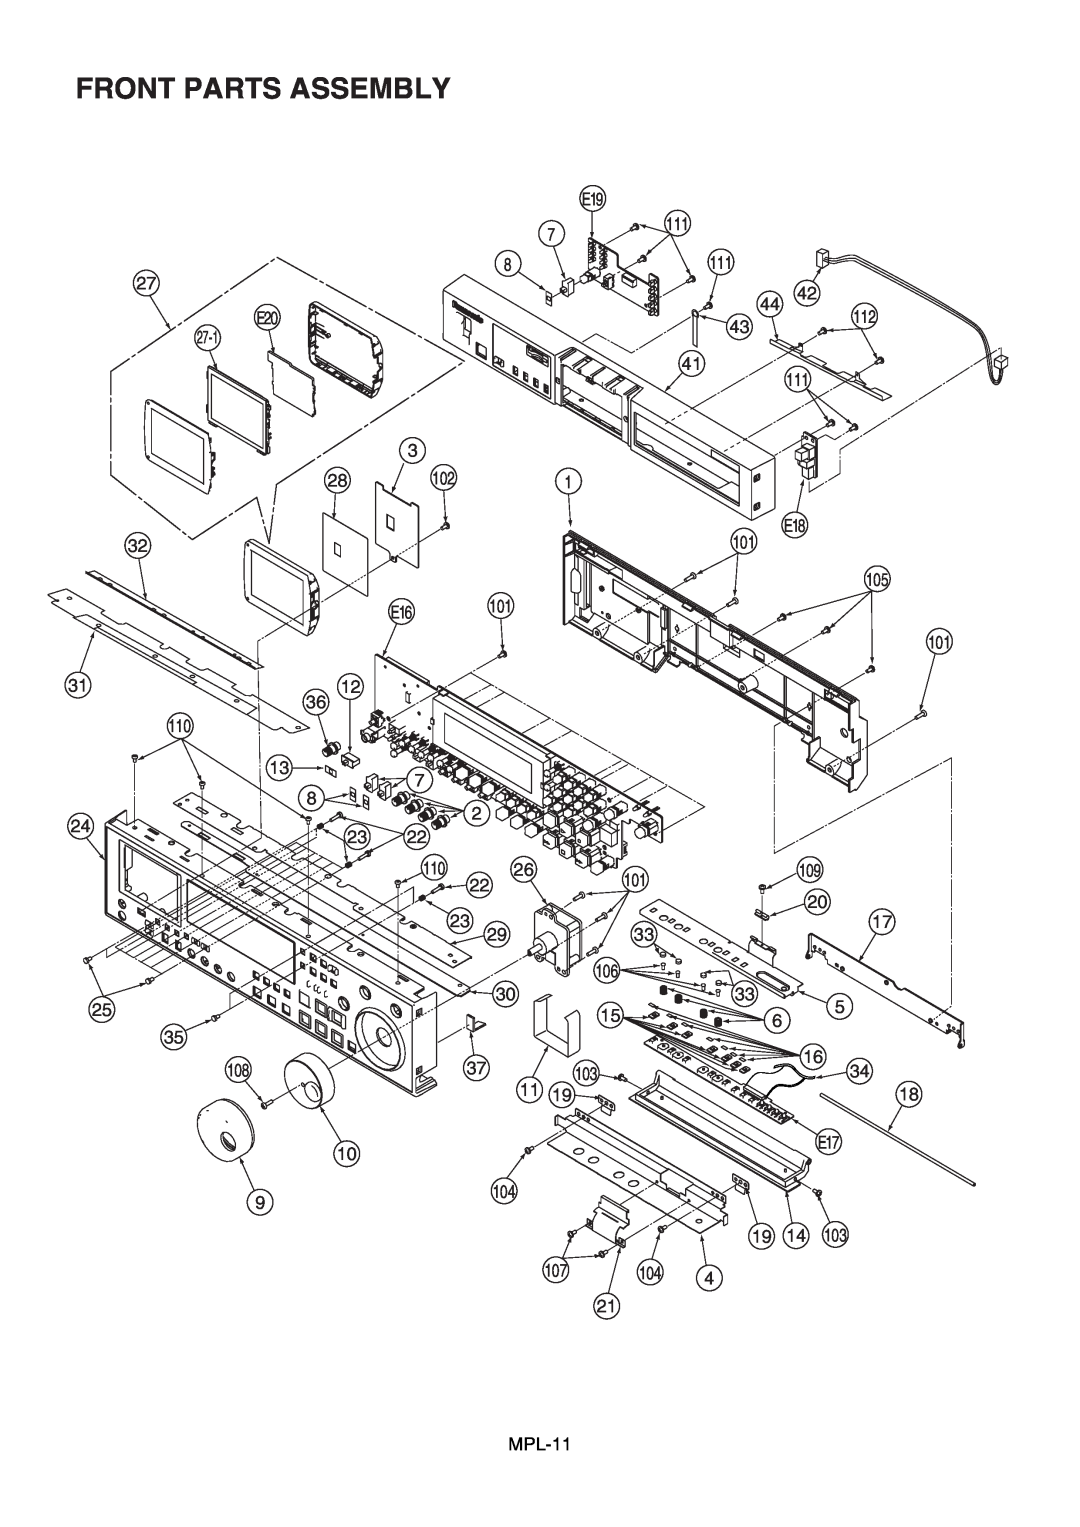 Panasonic AJ-D965MC, AJ-SD945E, AJ-SD965E, AJ-YAC965E manual Front Parts Assembly 